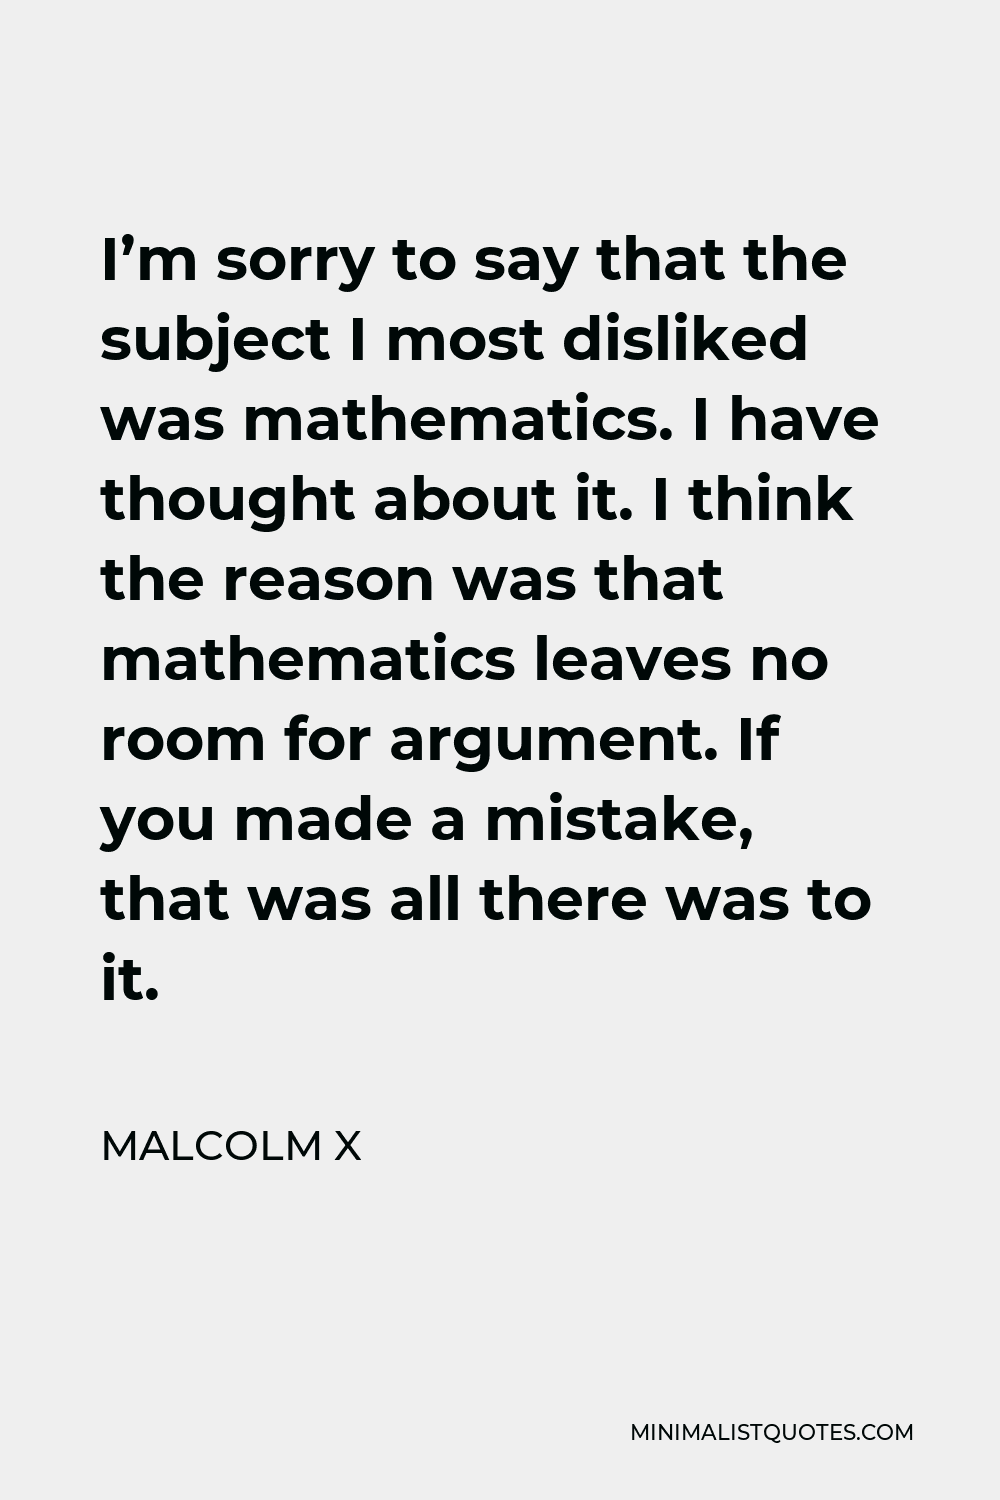 Malcolm X Quote: I'm sorry to say that the subject I most disliked was  mathematics. I have thought about it. I think the reason was that  mathematics leaves no room for argument.